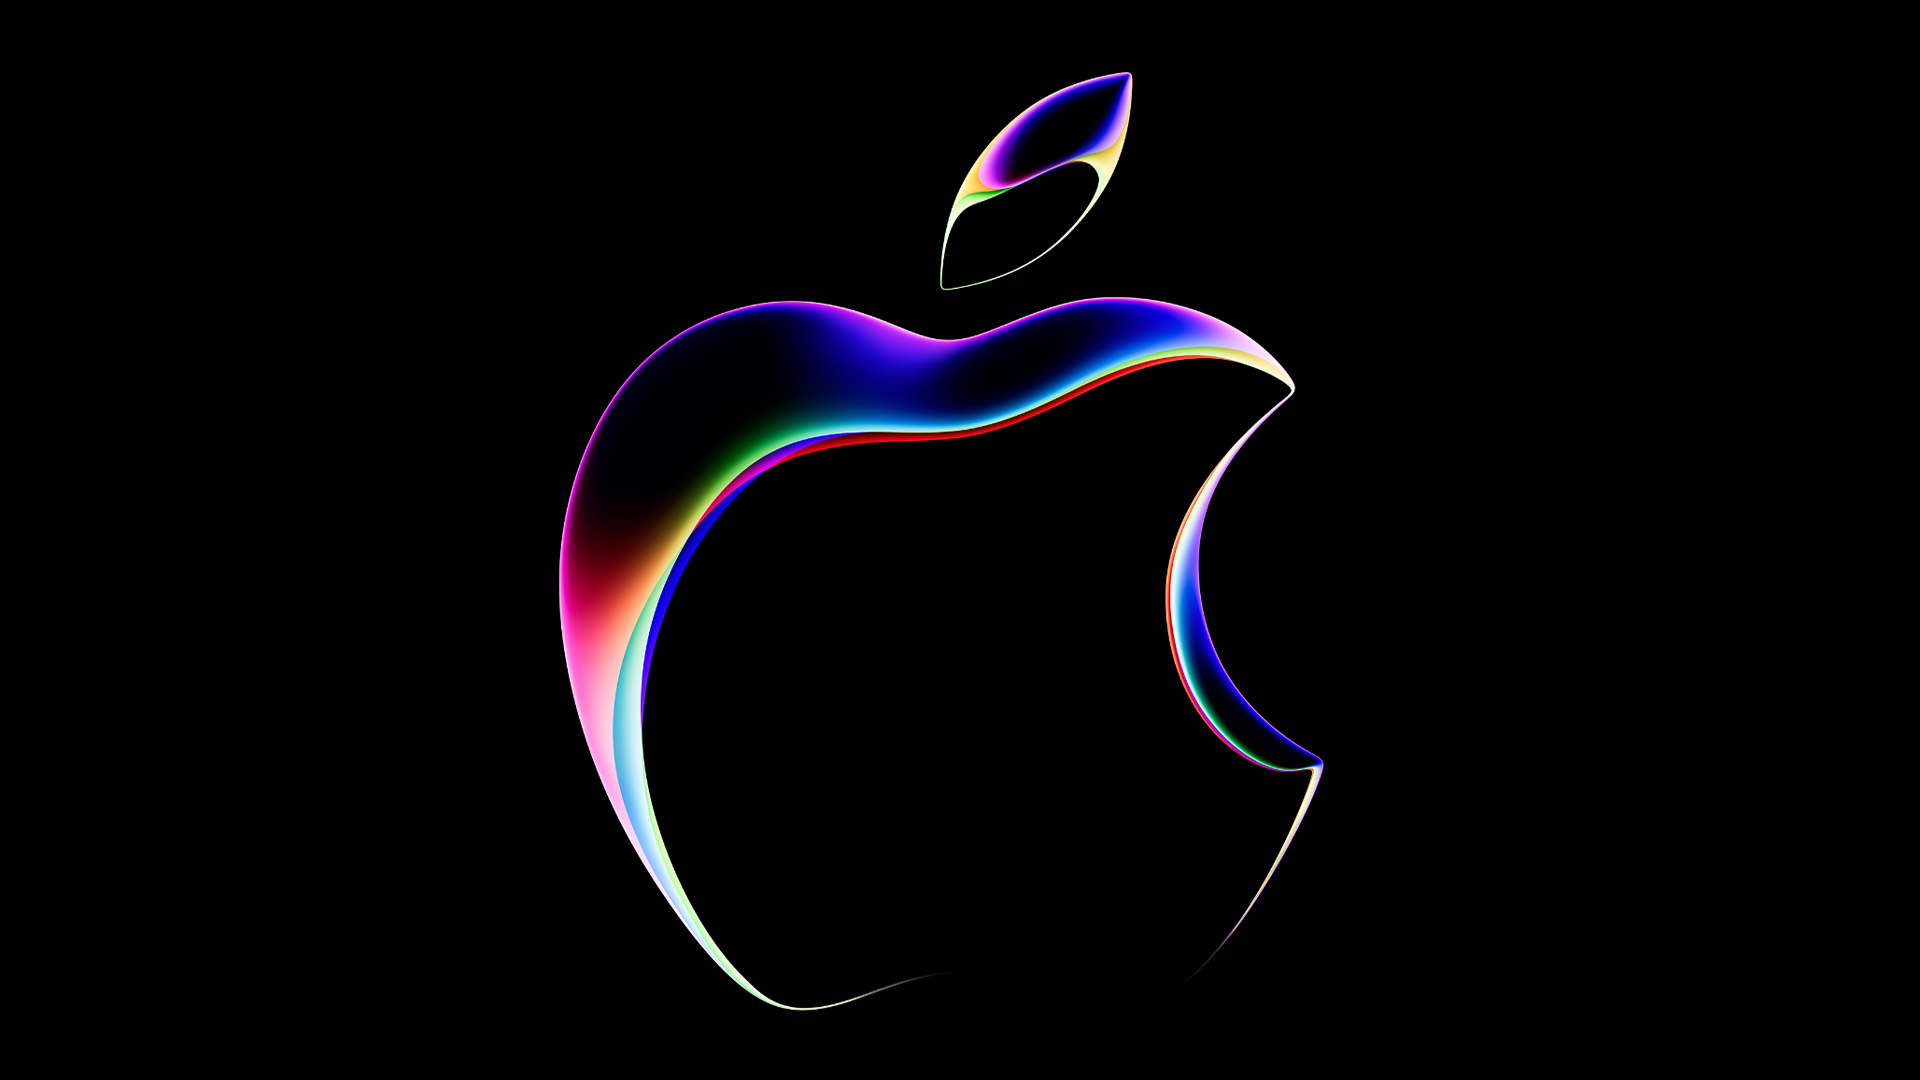 Apple logo in bright colors on a black background